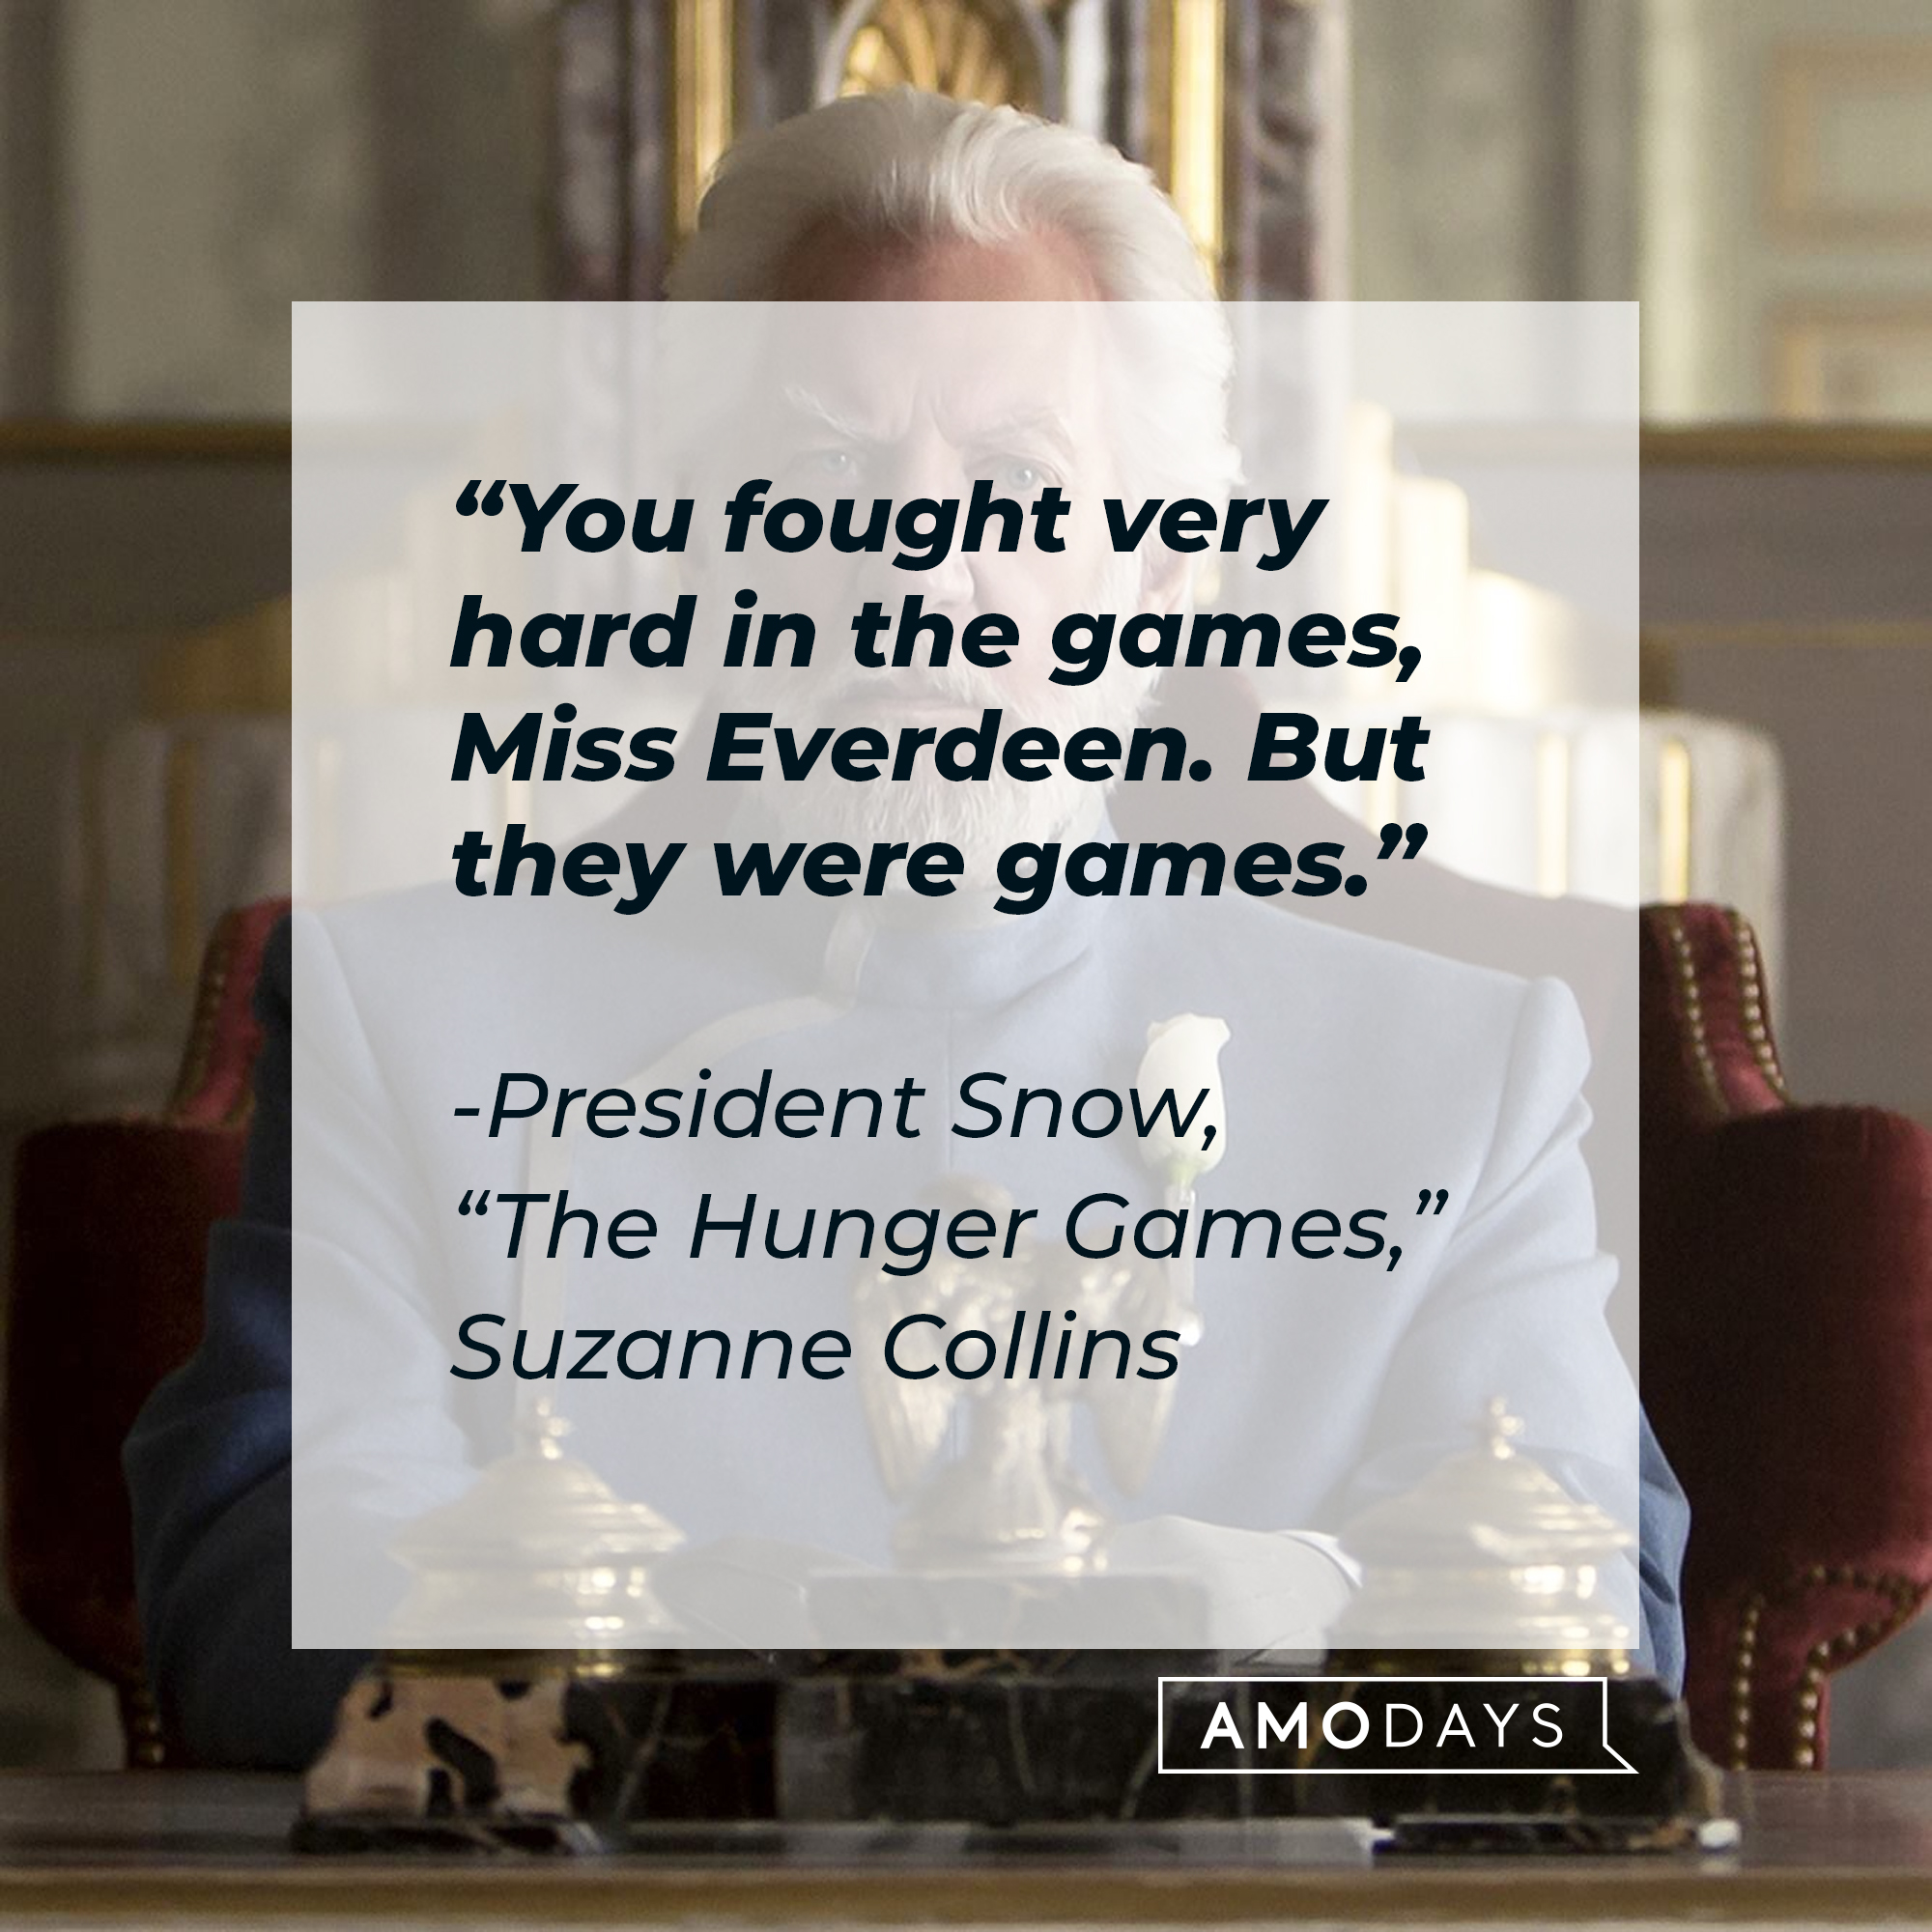 President Snow, with his quote from Suzanne Collins’ “Hunger Games,”"You fought very hard in the games, Miss Everdeen. But they were games." | Source: facebook.com/TheHungerGamesMovie